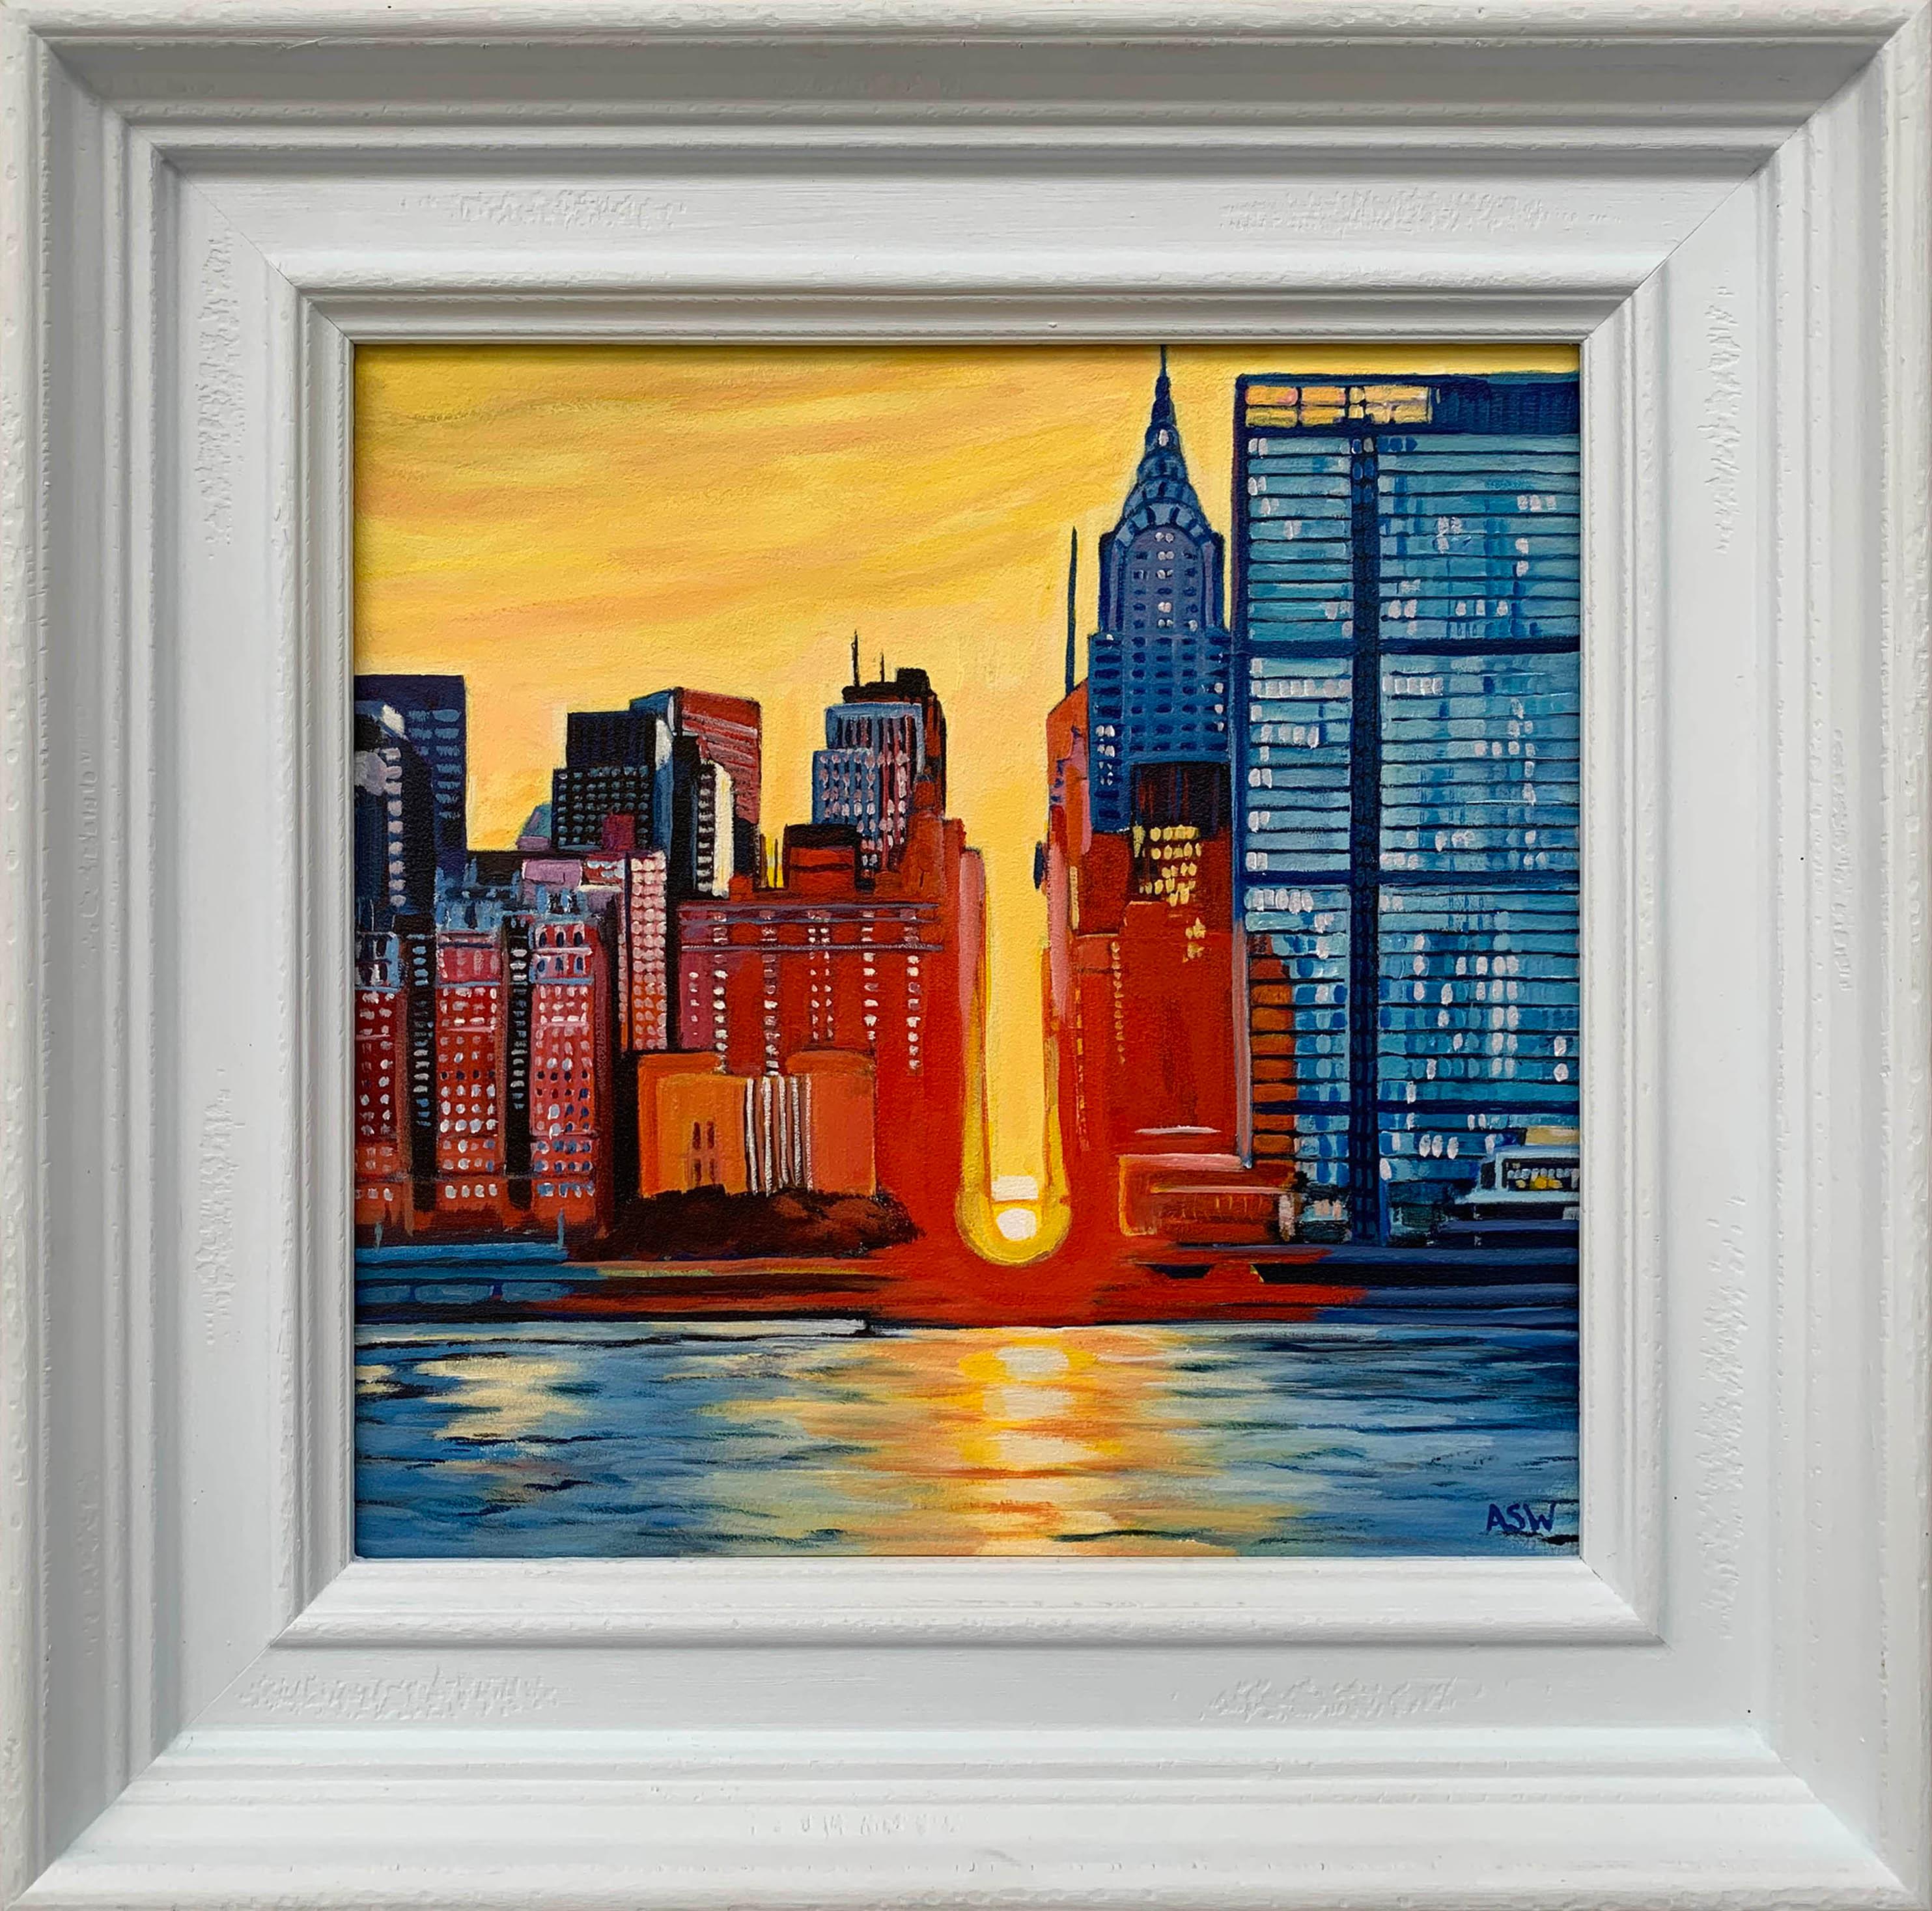 Angela Wakefield Figurative Painting - Contemporary Realism of New York City USA Sunset by Collectible British Artist